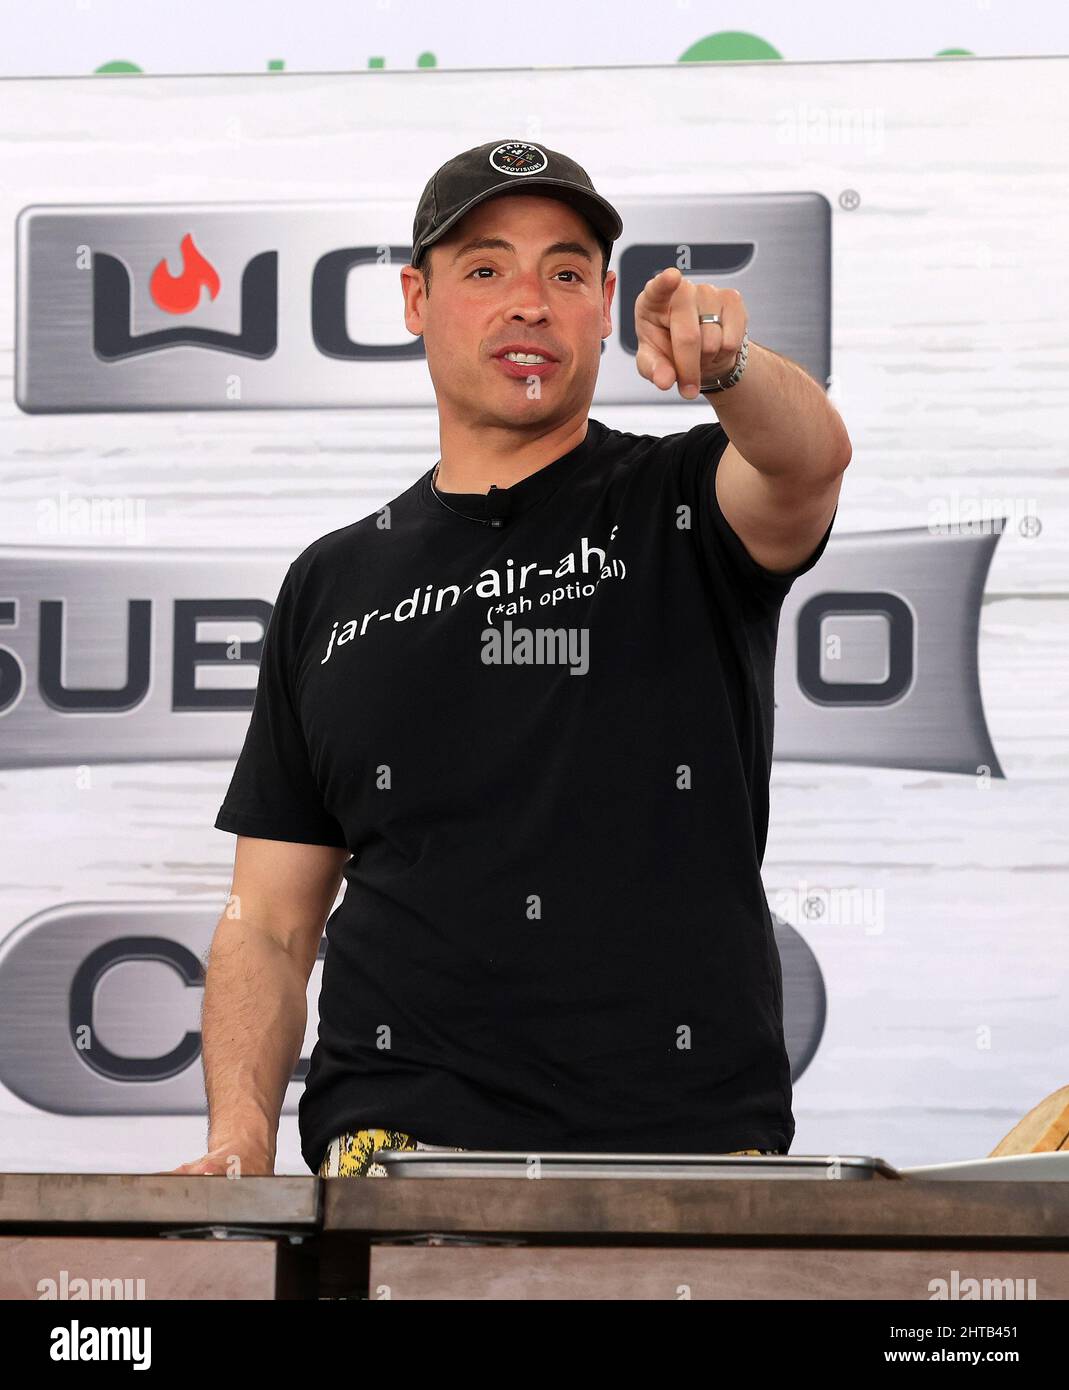 Jeff mauro hires stock photography and images  Alamy